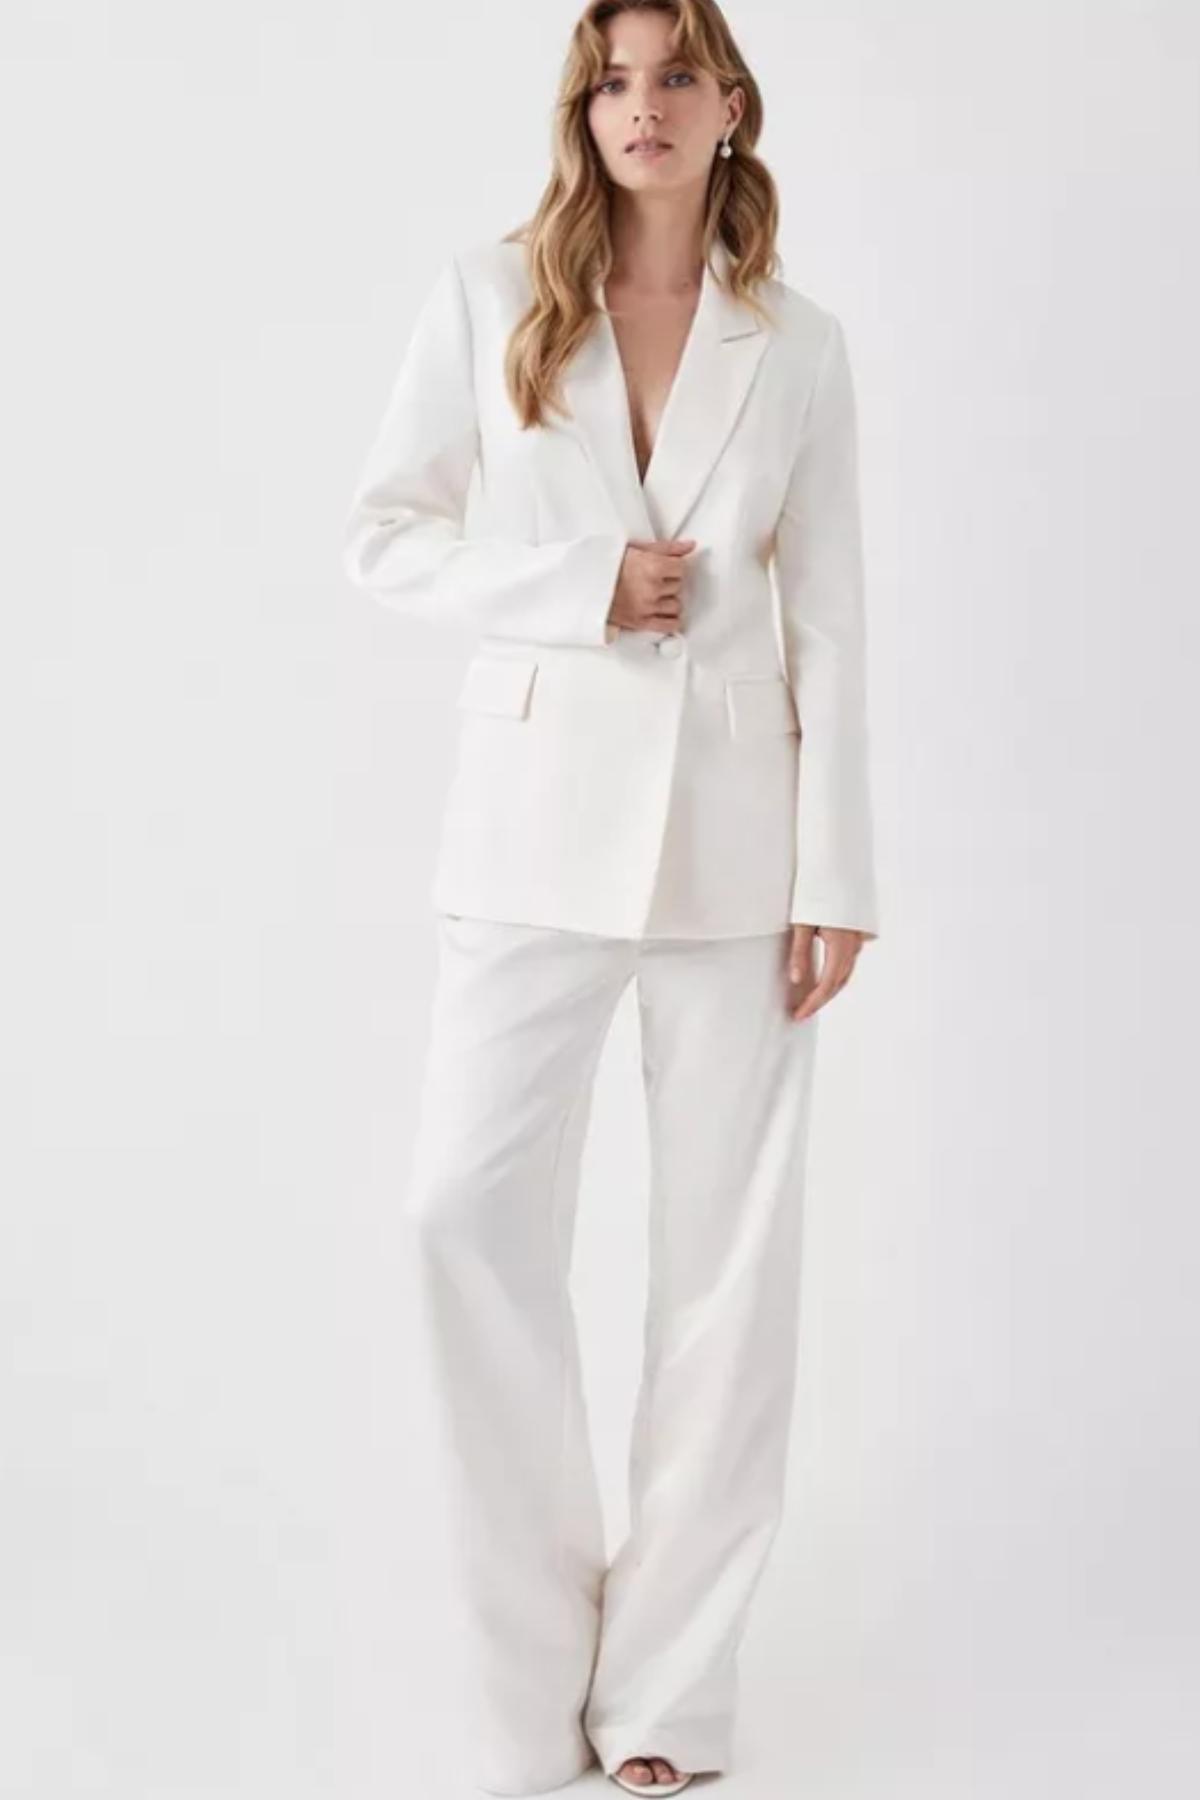 Womens Wedding Suits | Wil Valor